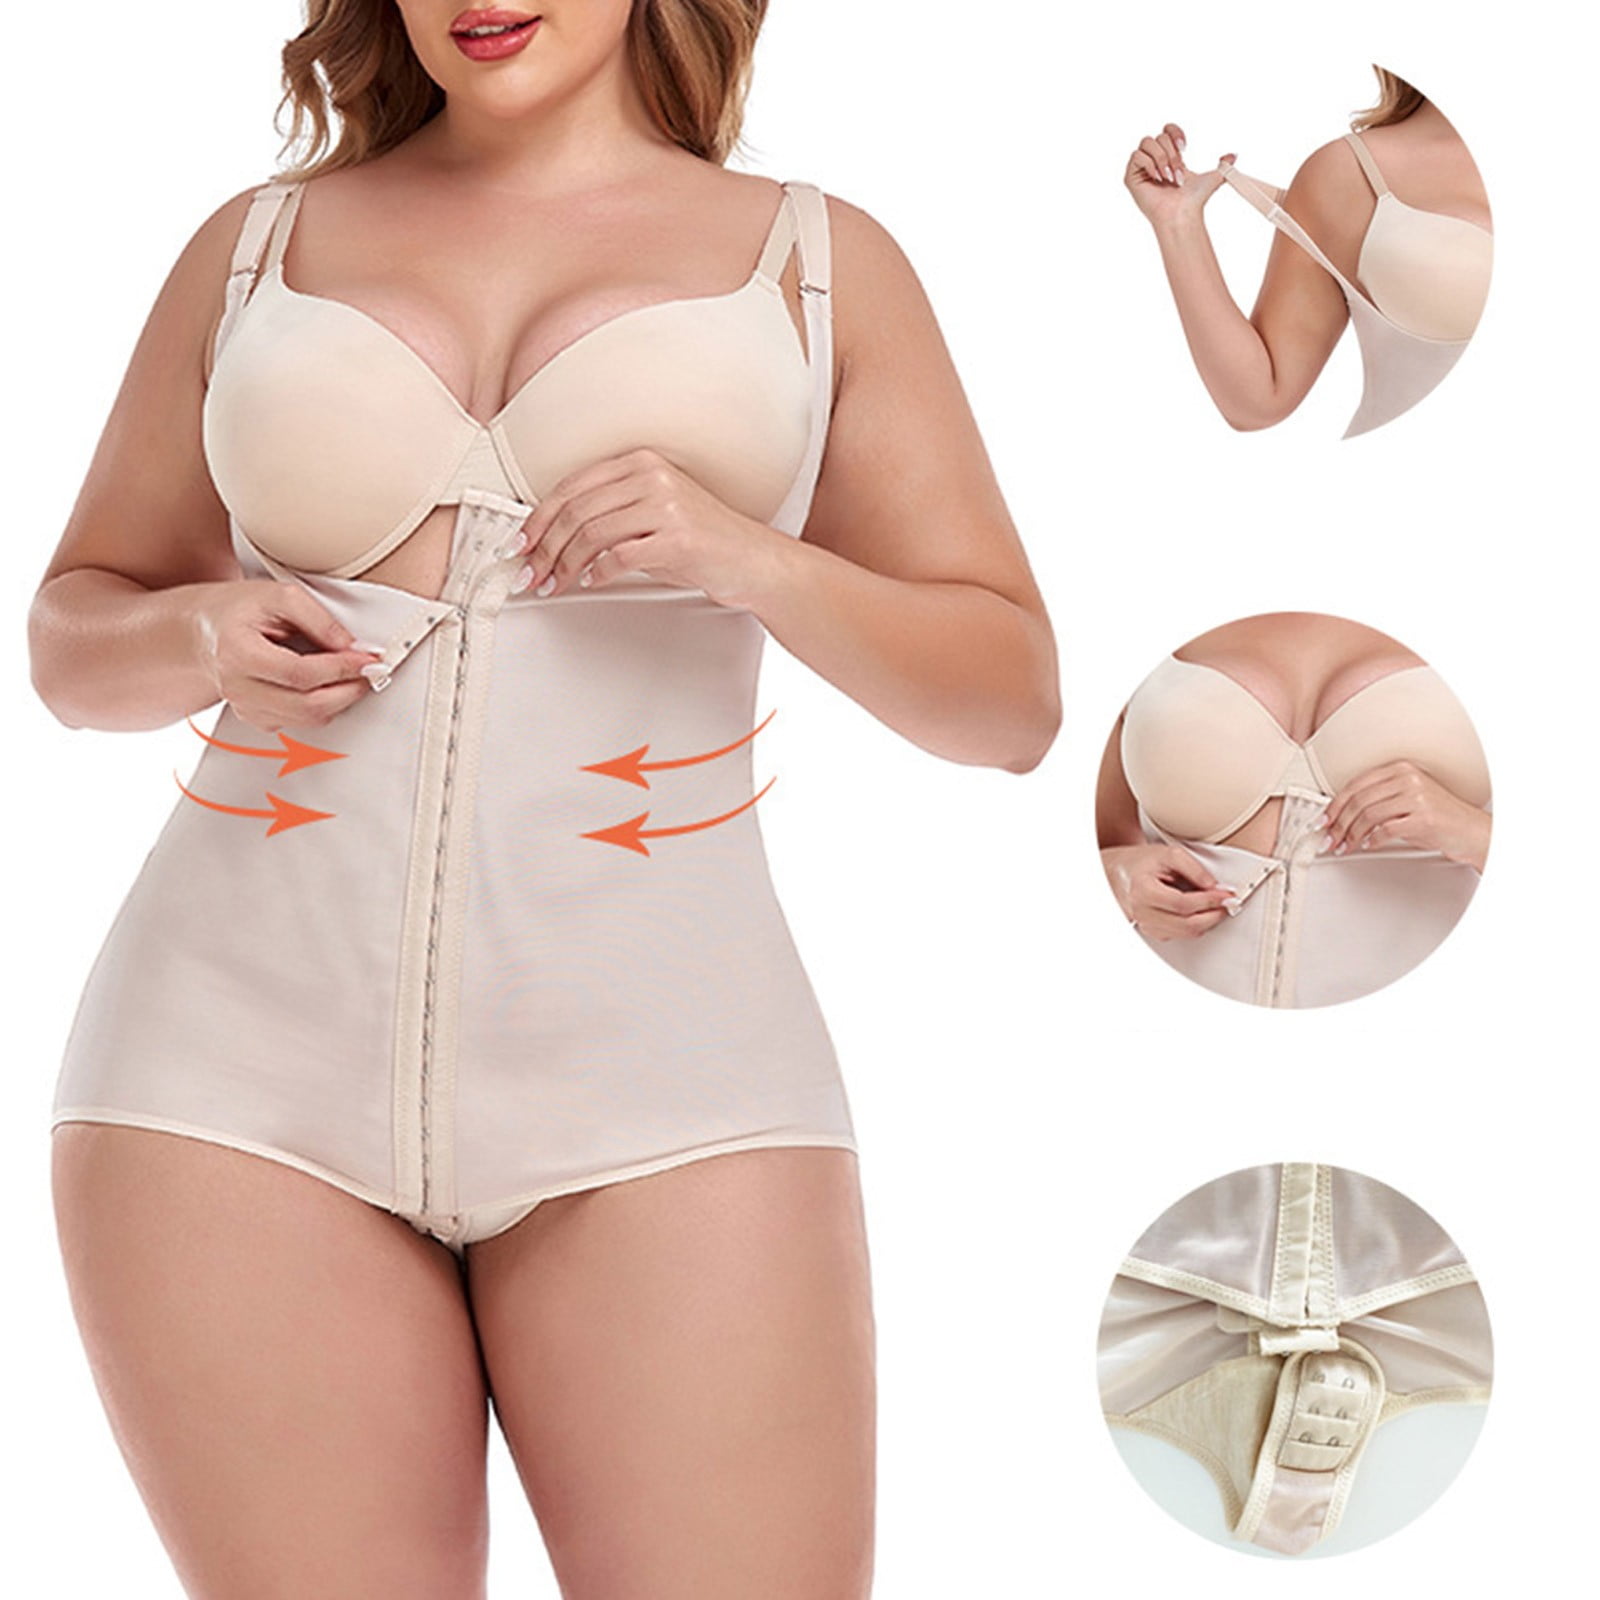 Strapless Shapewear For Women Tummy Control Superior Quality Full Mesh  Waist Trainer Lingerie Shaping Pants Beige XL